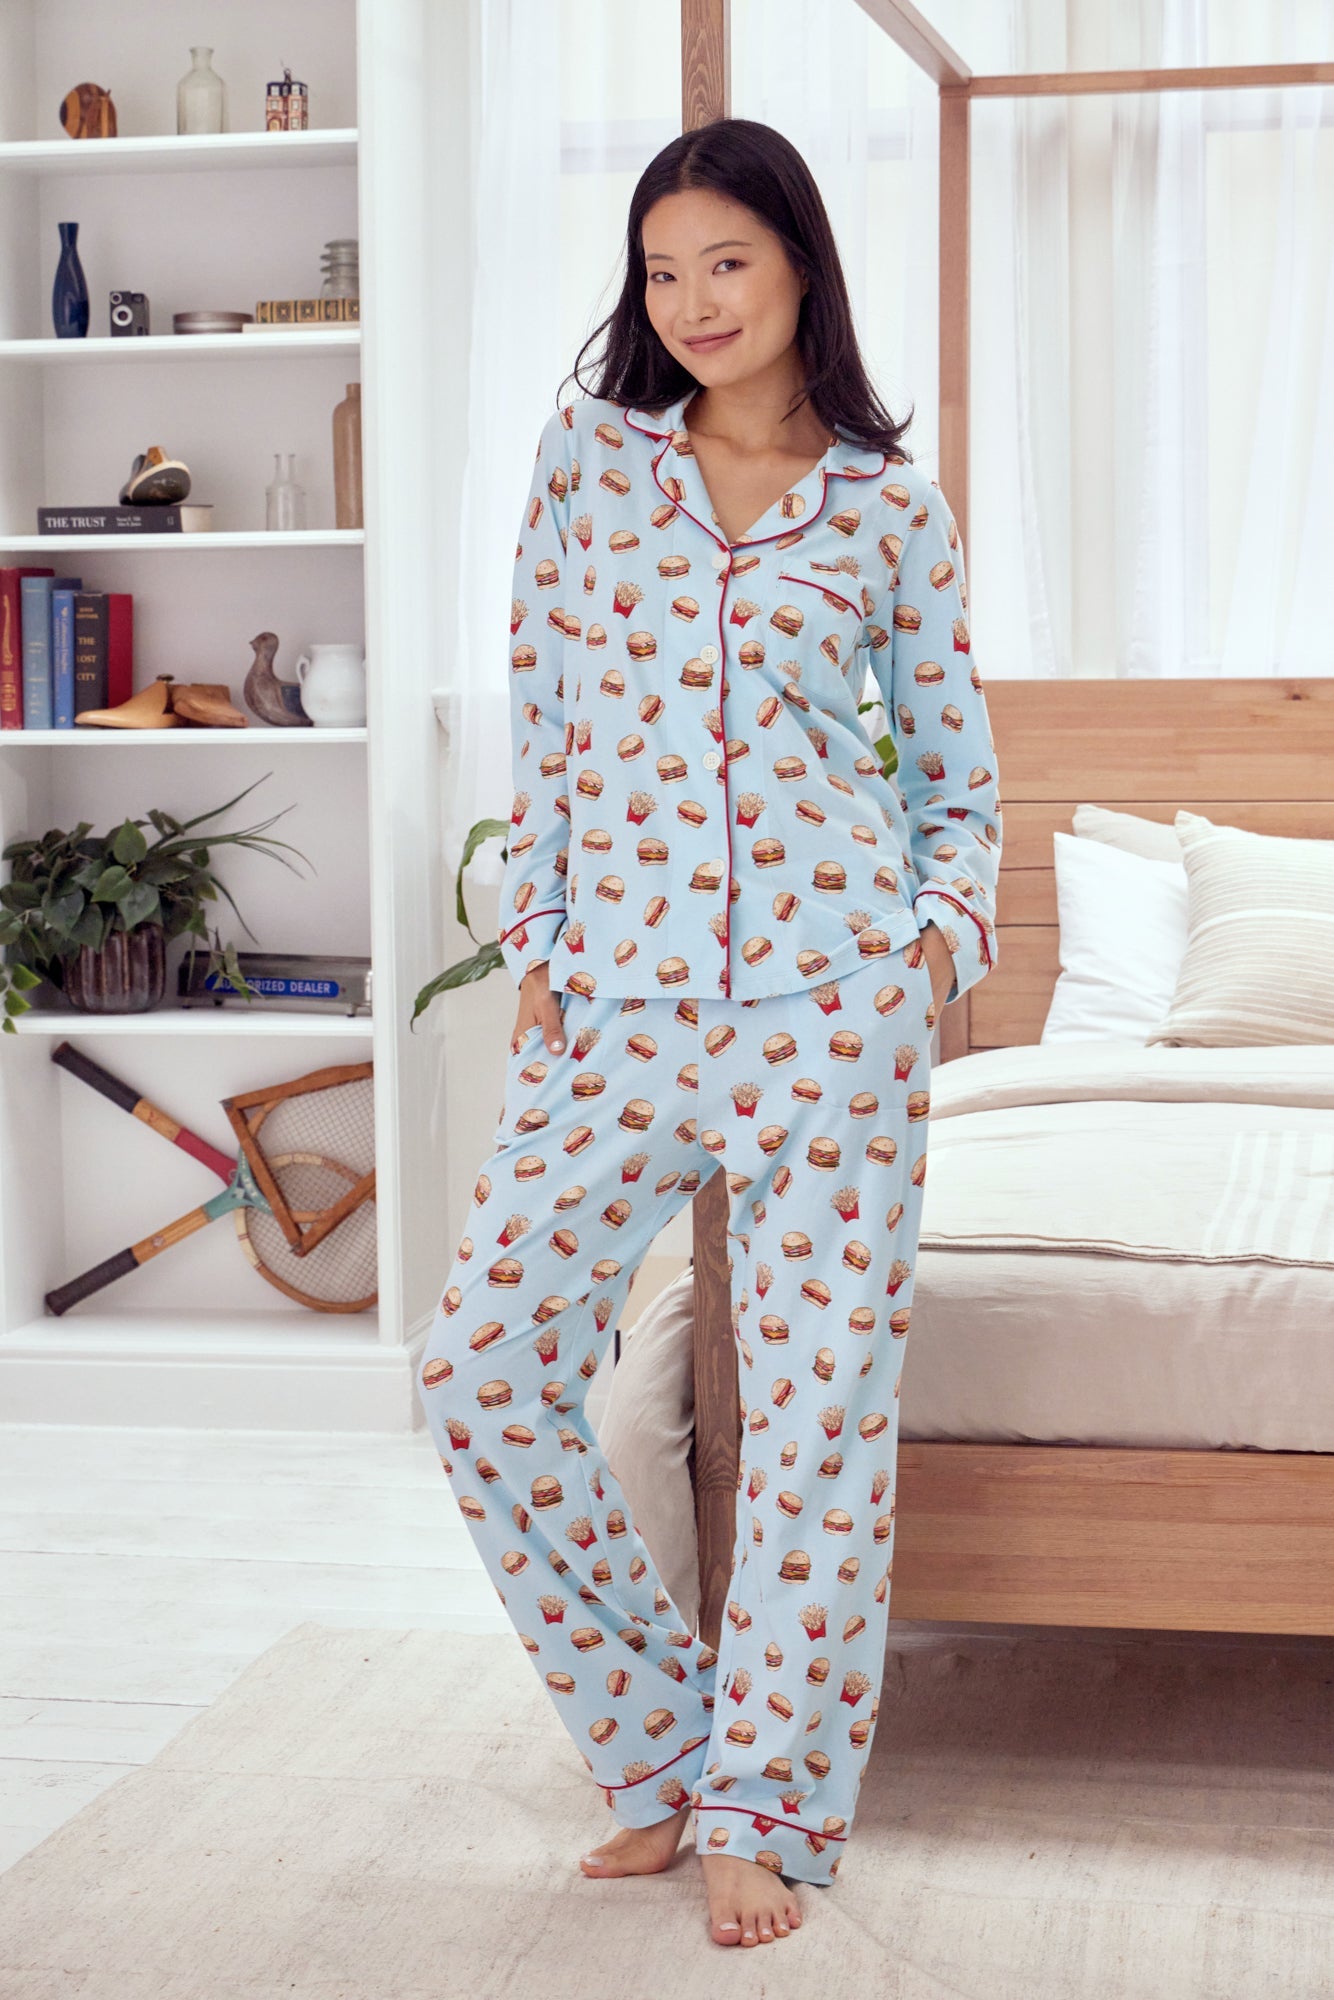 A lady wearing a blue long sleeve pj set with burger and fries pattern.